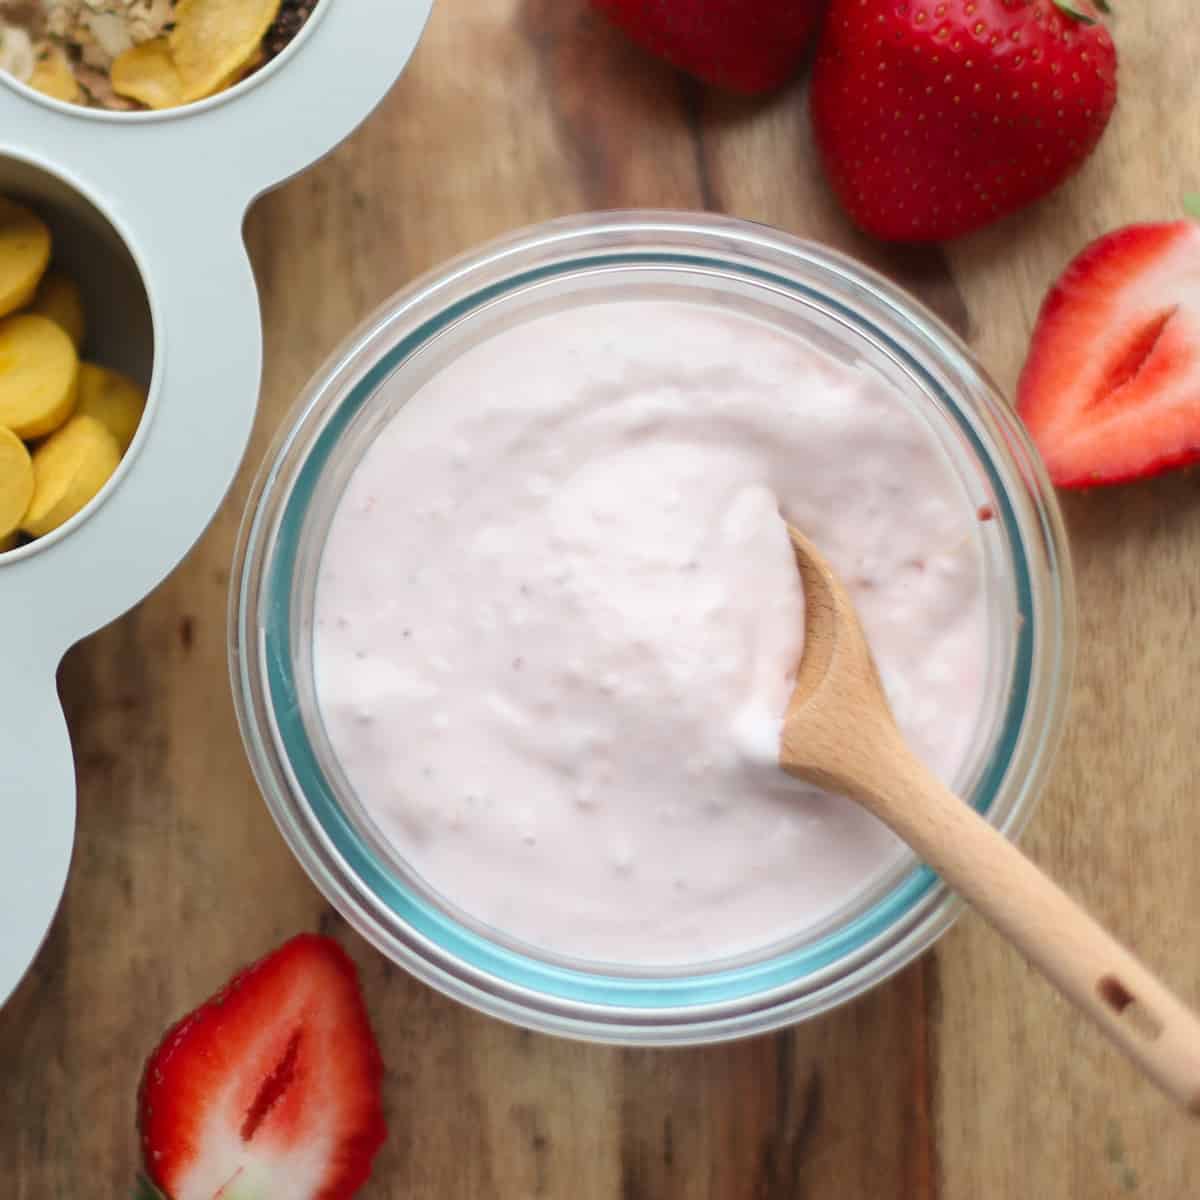 A close up shot of strawberry yogurt with strawberries in the backgrounnd.